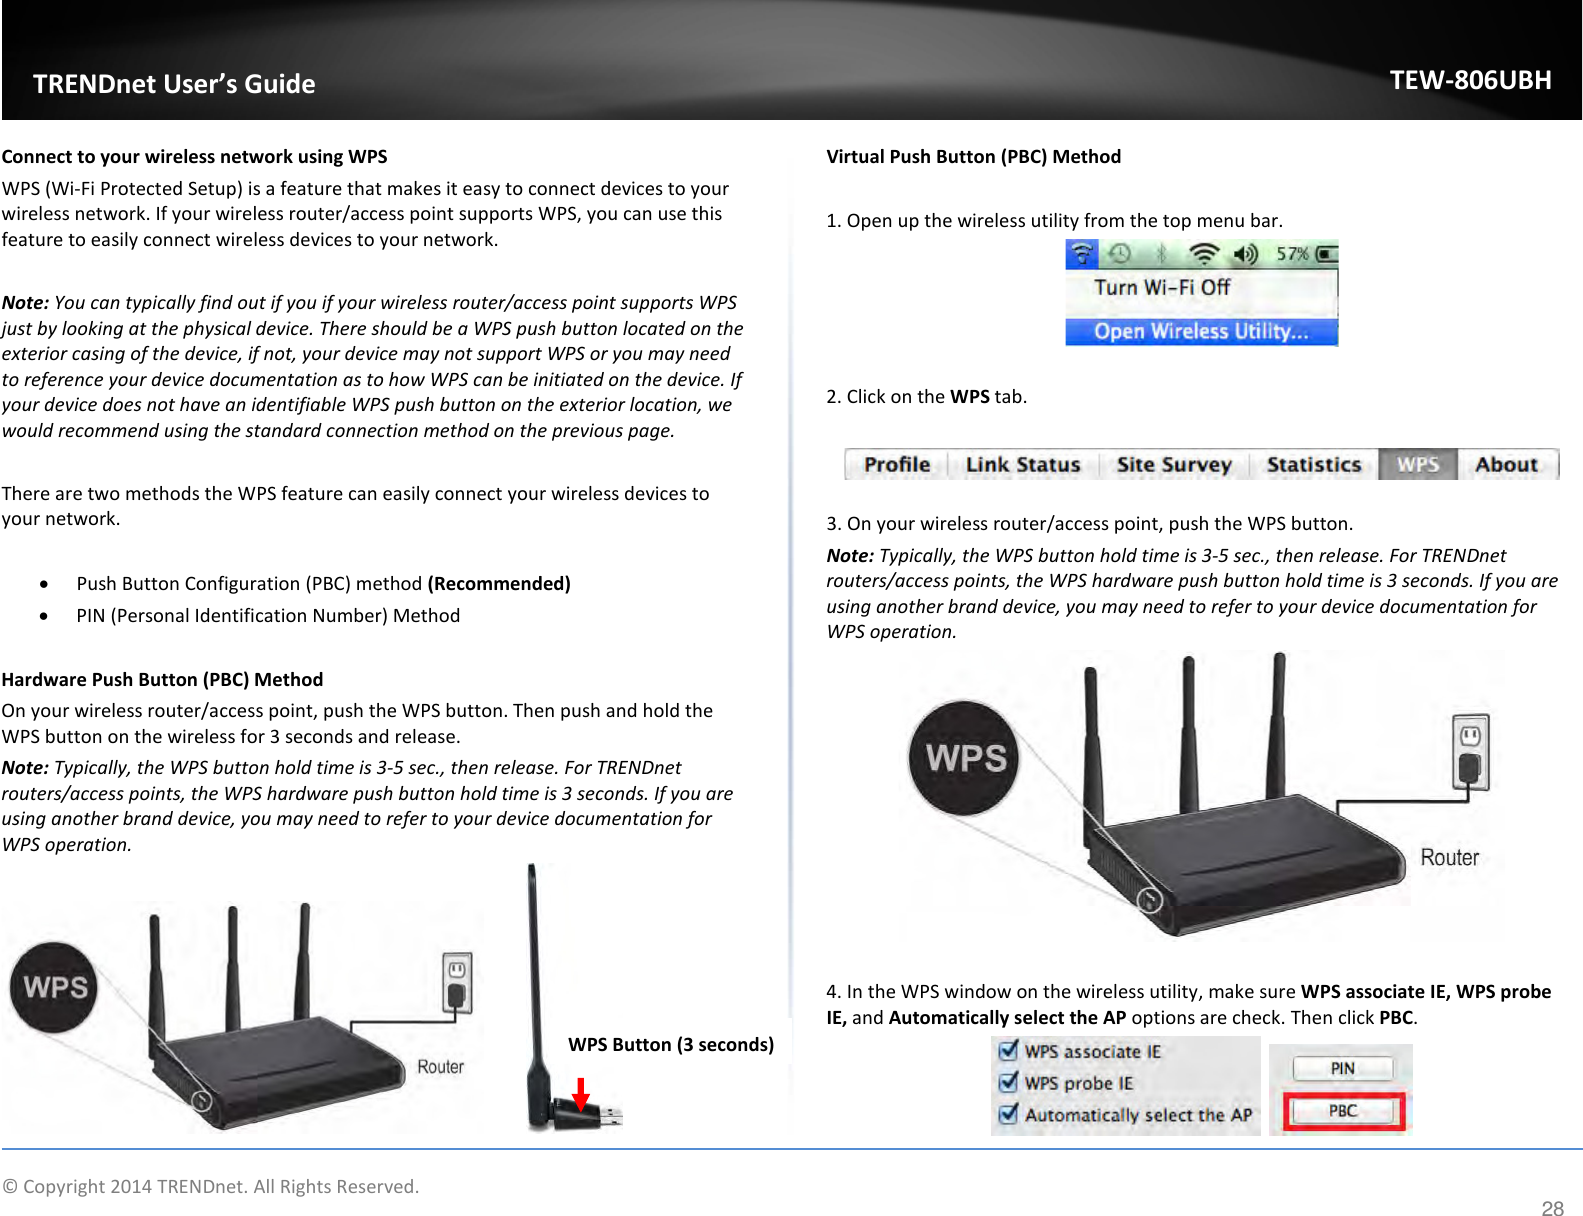              © Copyright 2014 TRENDnet. All Rights Reserved.       TRENDnet User’s Guide TEW-806UBH 28 Connect to your wireless network using WPS WPS (Wi-Fi Protected Setup) is a feature that makes it easy to connect devices to your wireless network. If your wireless router/access point supports WPS, you can use this feature to easily connect wireless devices to your network.   Note: You can typically find out if you if your wireless router/access point supports WPS just by looking at the physical device. There should be a WPS push button located on the exterior casing of the device, if not, your device may not support WPS or you may need to reference your device documentation as to how WPS can be initiated on the device. If your device does not have an identifiable WPS push button on the exterior location, we would recommend using the standard connection method on the previous page.  There are two methods the WPS feature can easily connect your wireless devices to your network.  • Push Button Configuration (PBC) method (Recommended) • PIN (Personal Identification Number) Method   Hardware Push Button (PBC) Method On your wireless router/access point, push the WPS button. Then push and hold the WPS button on the wireless for 3 seconds and release. Note: Typically, the WPS button hold time is 3-5 sec., then release. For TRENDnet routers/access points, the WPS hardware push button hold time is 3 seconds. If you are using another brand device, you may need to refer to your device documentation for WPS operation.  Virtual Push Button (PBC) Method  1. Open up the wireless utility from the top menu bar.   2. Click on the WPS tab.    3. On your wireless router/access point, push the WPS button.  Note: Typically, the WPS button hold time is 3-5 sec., then release. For TRENDnet routers/access points, the WPS hardware push button hold time is 3 seconds. If you are using another brand device, you may need to refer to your device documentation for WPS operation.   4. In the WPS window on the wireless utility, make sure WPS associate IE, WPS probe IE, and Automatically select the AP options are check. Then click PBC.     WPS Button (3 seconds) 